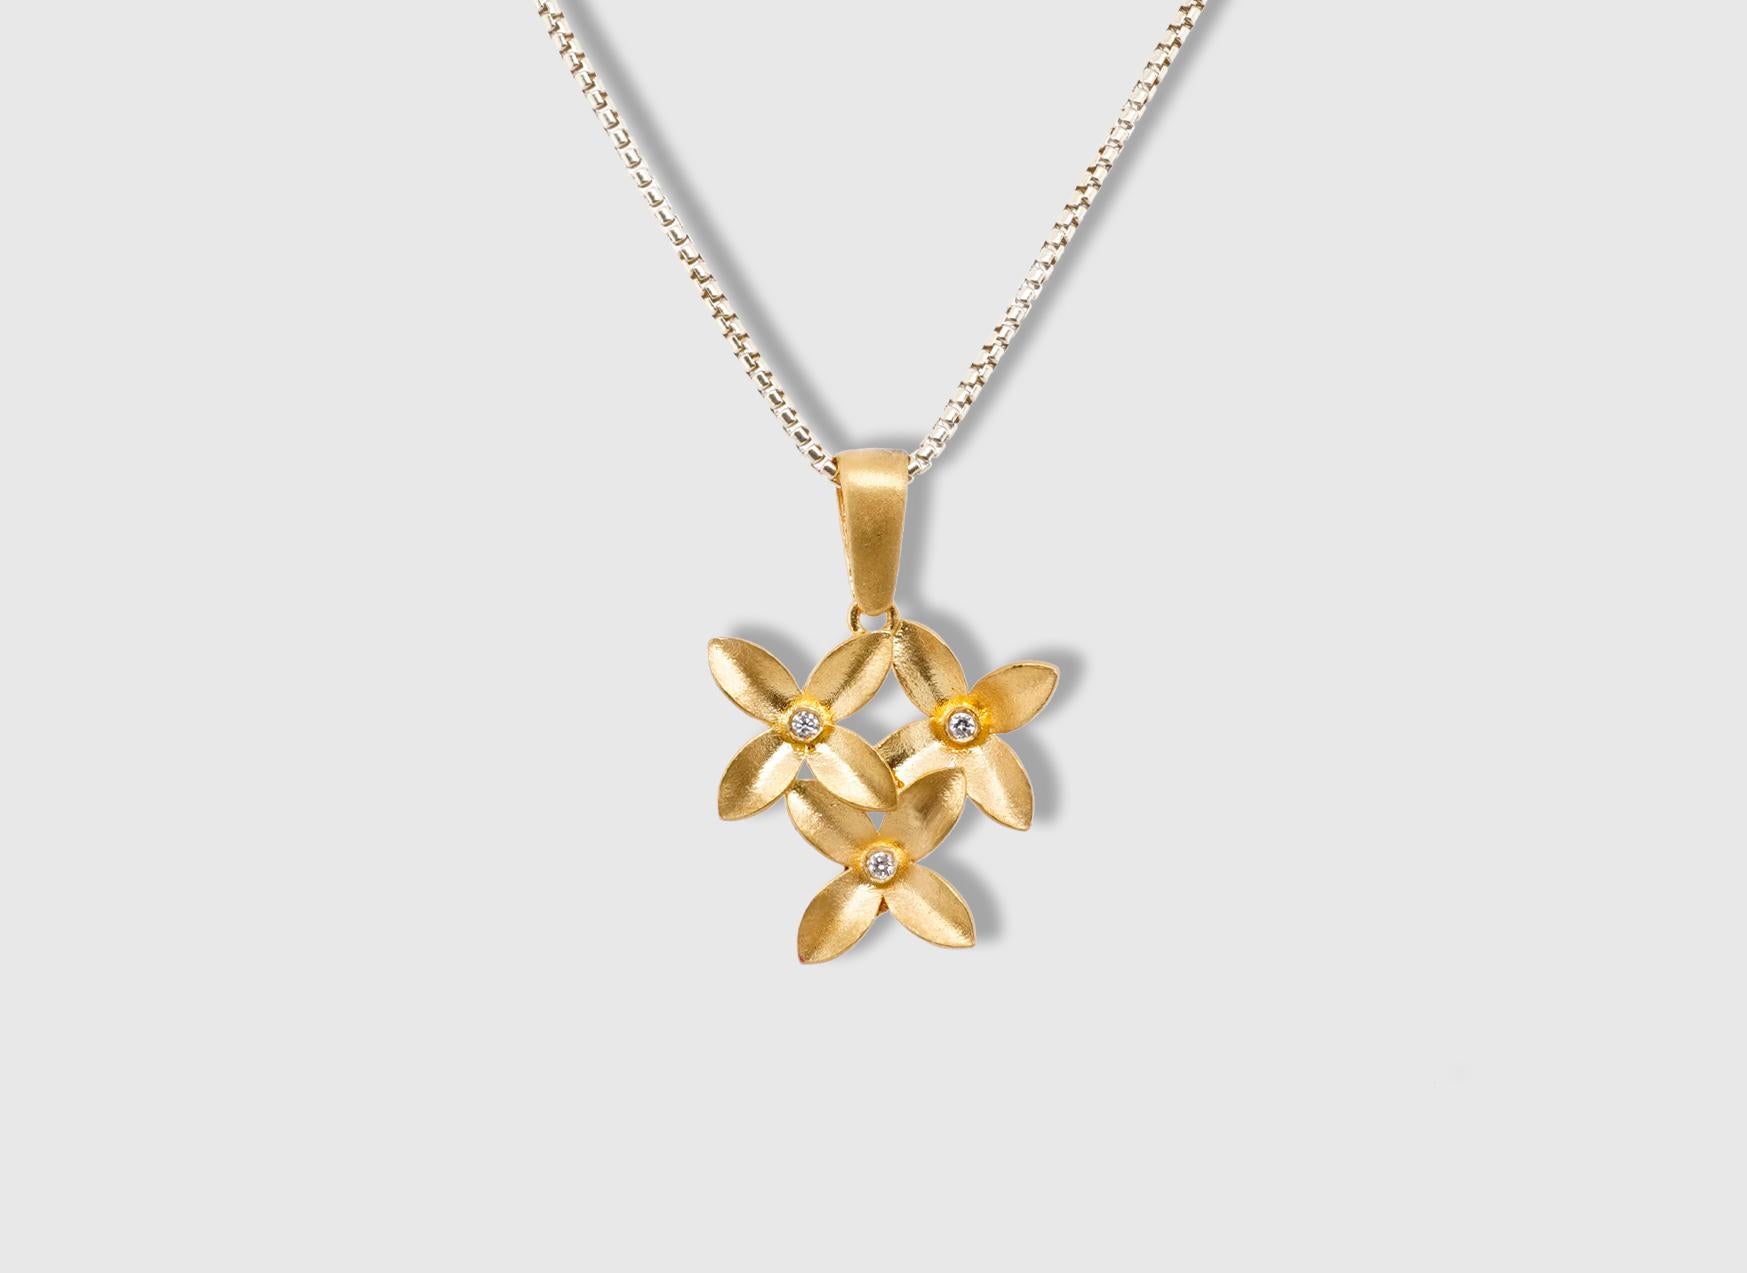 Triple Four-Petal Flower CharmPendant Necklace with Diamonds, 24kt Solid Gold by Prehistoric Works of Istanbul, Turkey. These pendants look great alone or paired with other coin pendants or with miniature pendants. Measures 18mm x 23mm. Diamonds,